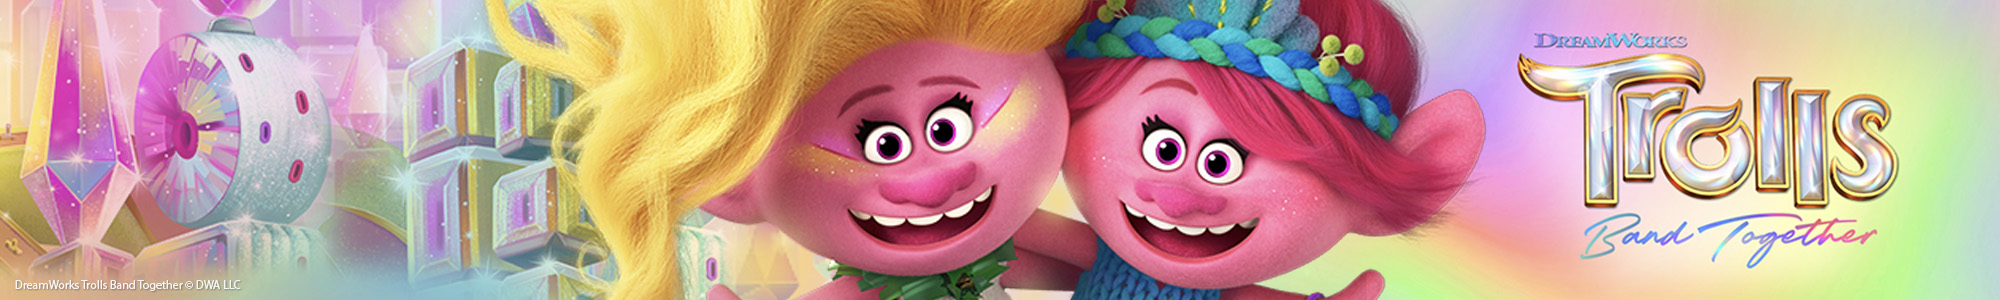 TE_Trolls_Brand Page Banner-2000x300.png